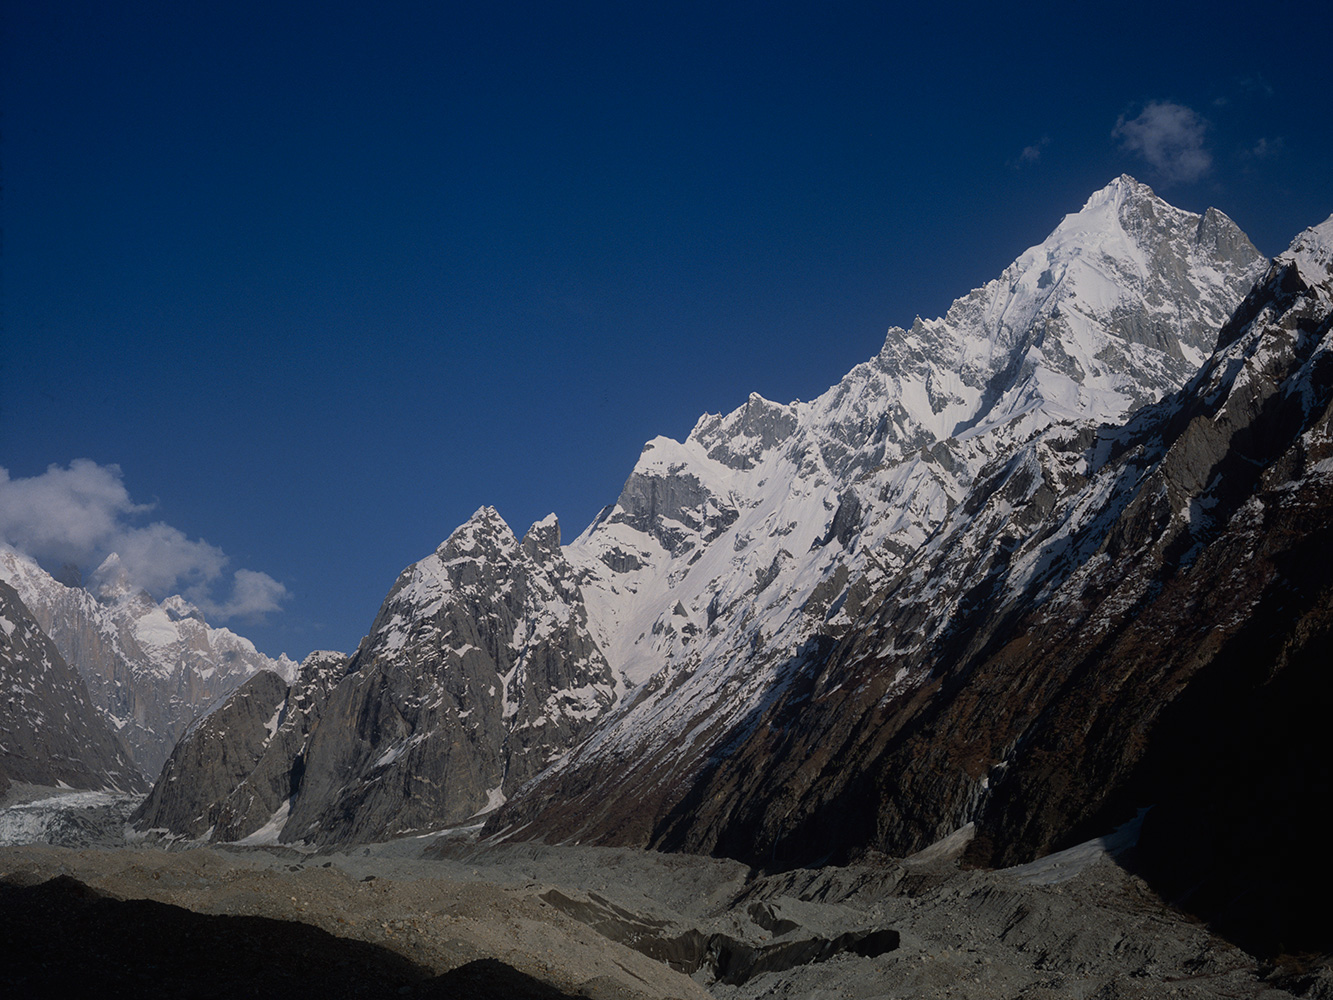 Seen from Saitcho, towering above the lower reaches of the Charaksa or Charakusa glacier above Hushe.